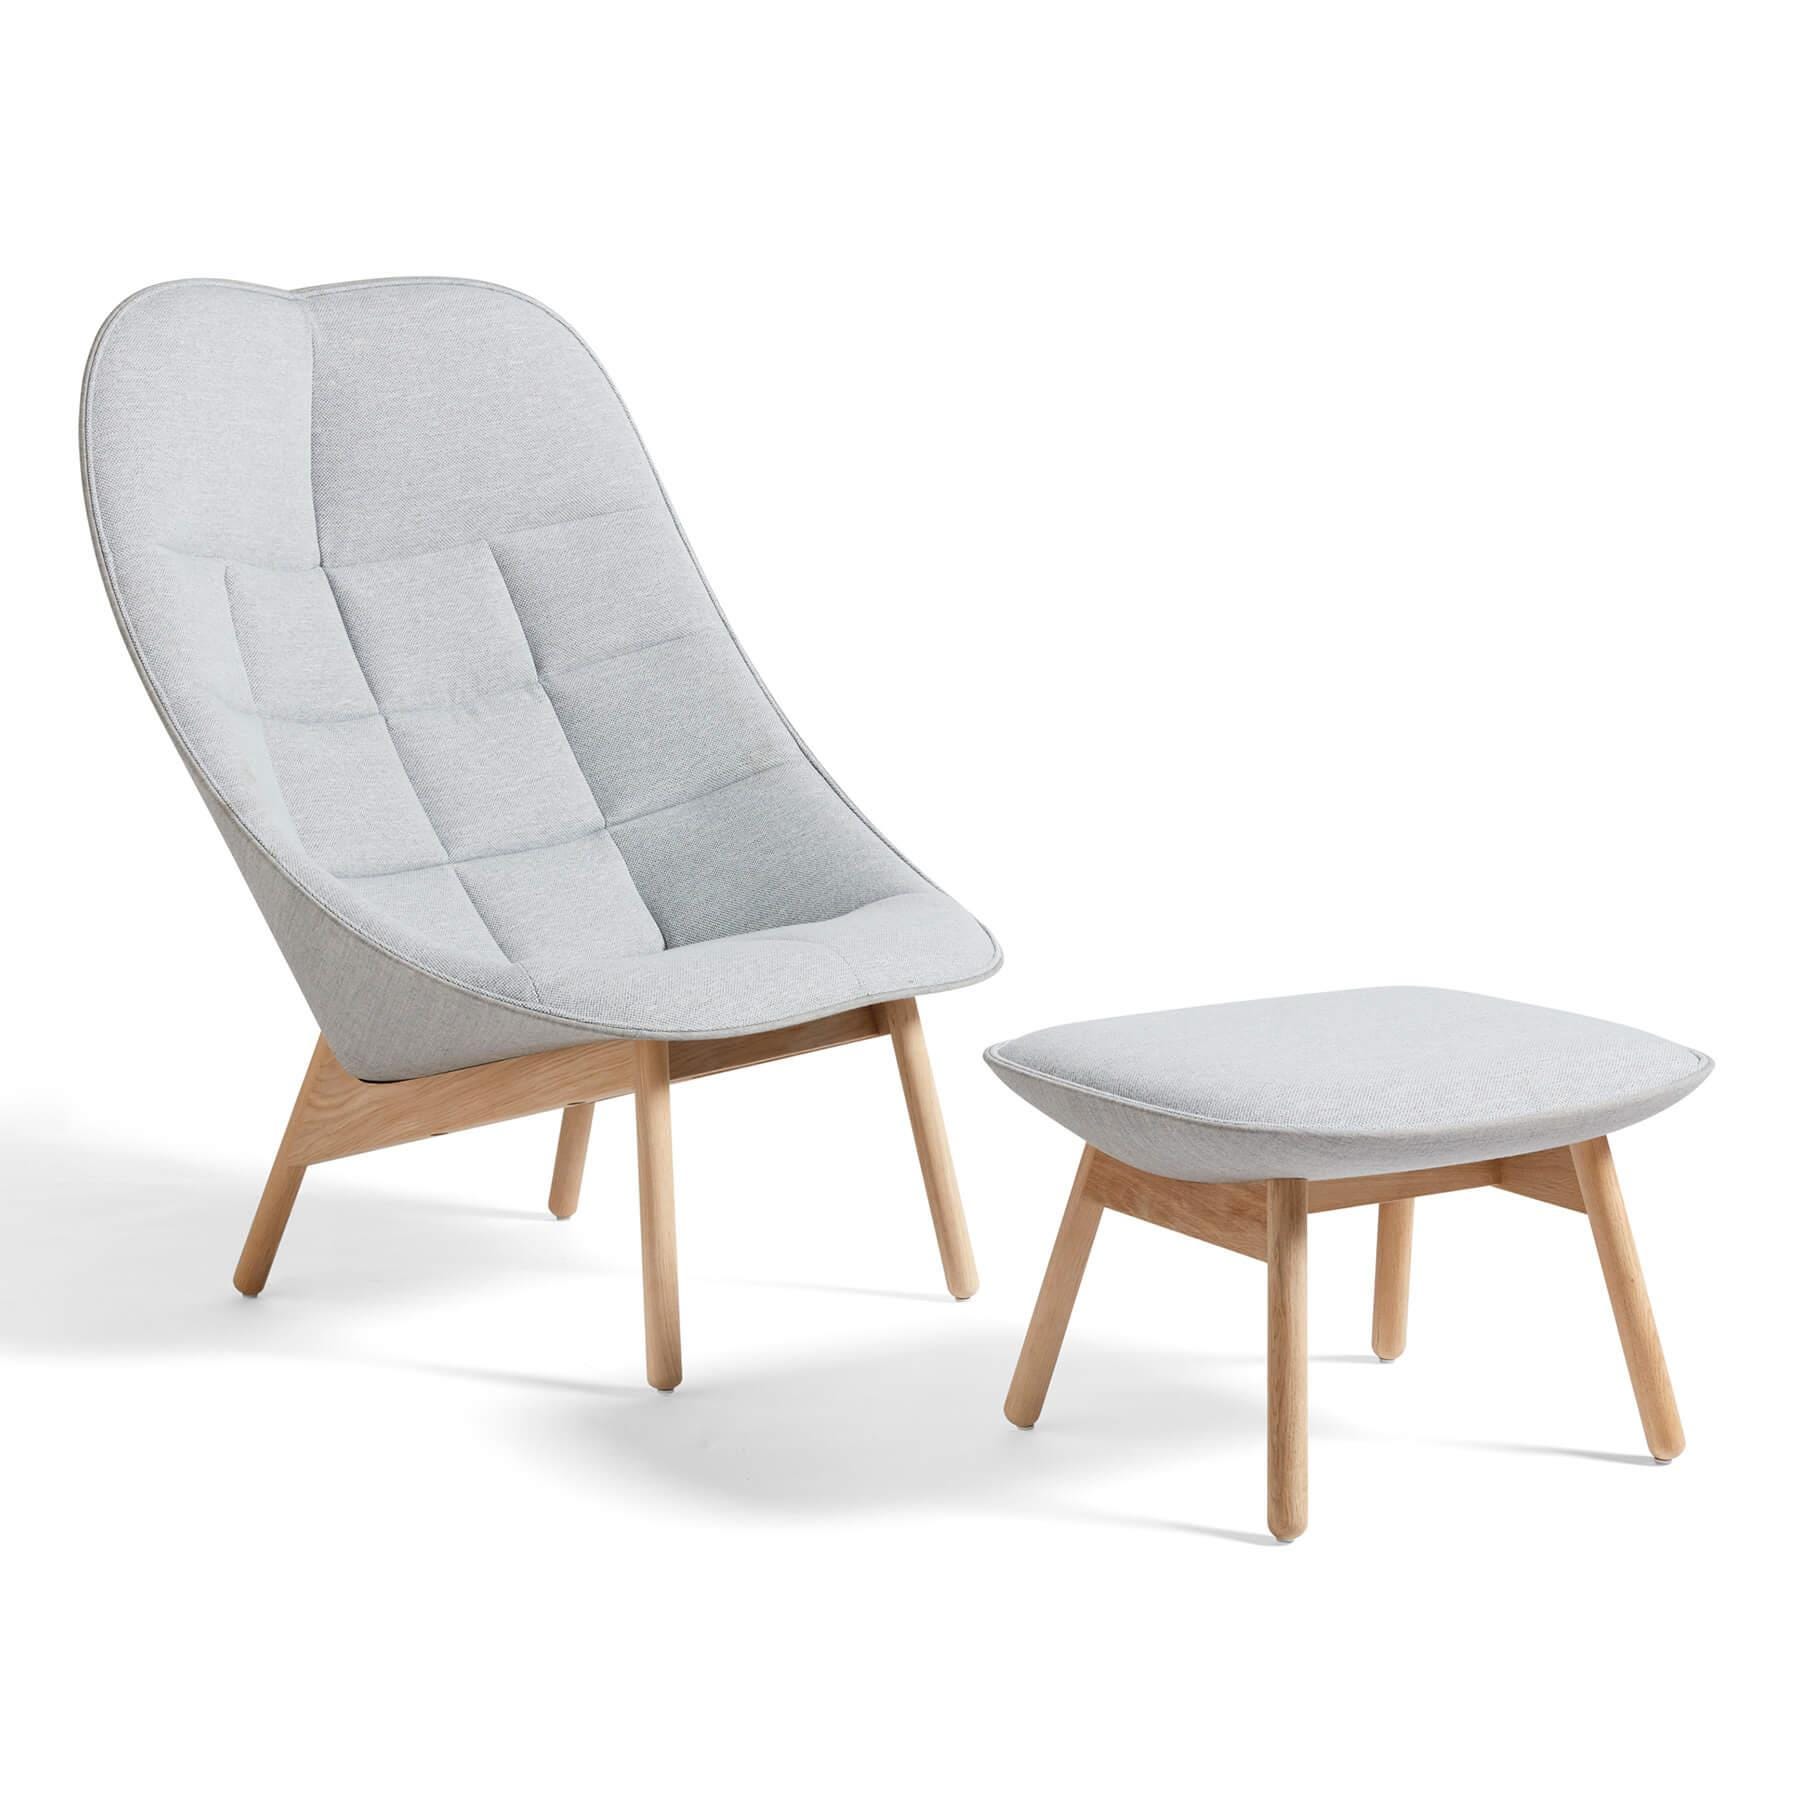 Hay Uchiwa Lounge Chair Quilted Mode 002 Remix 123 Oak Base With Ottoman Grey Designer Furniture From Holloways Of Ludlow